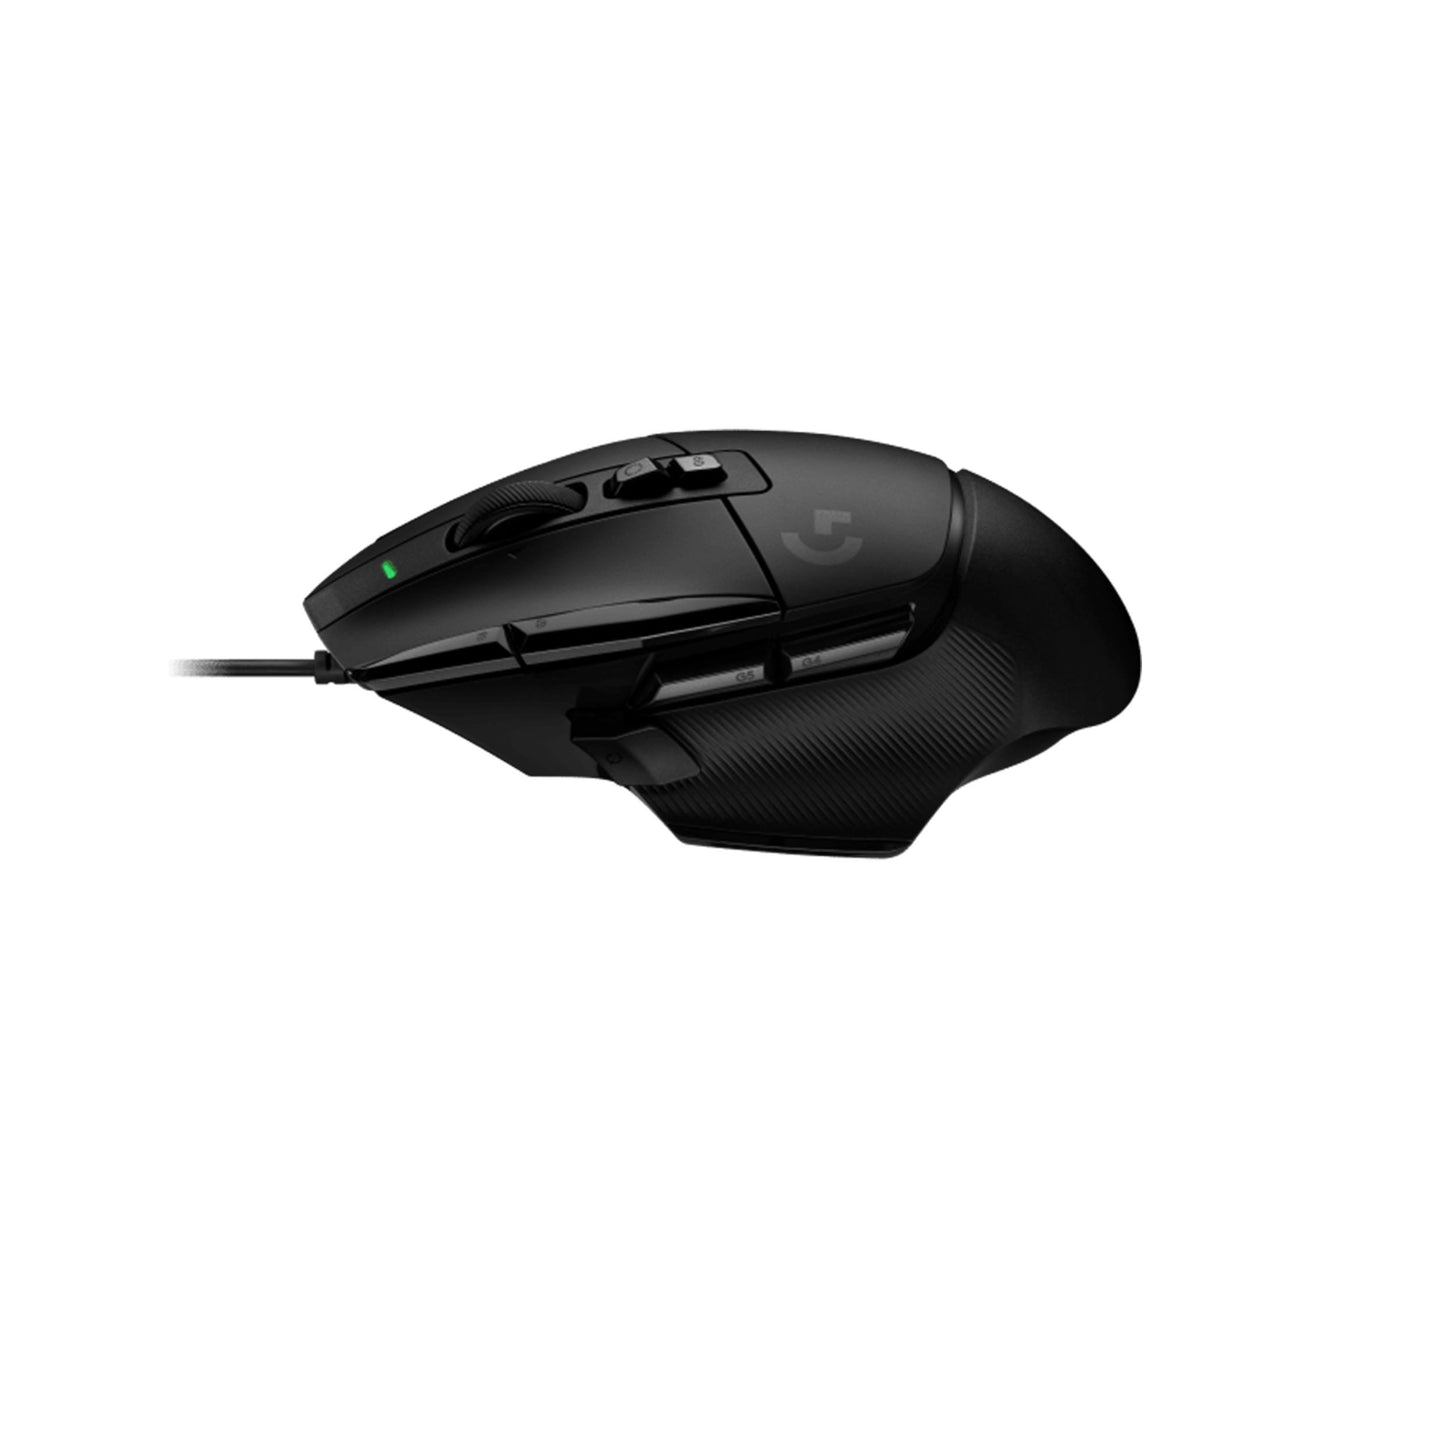 G502 X GAMING MOUSE